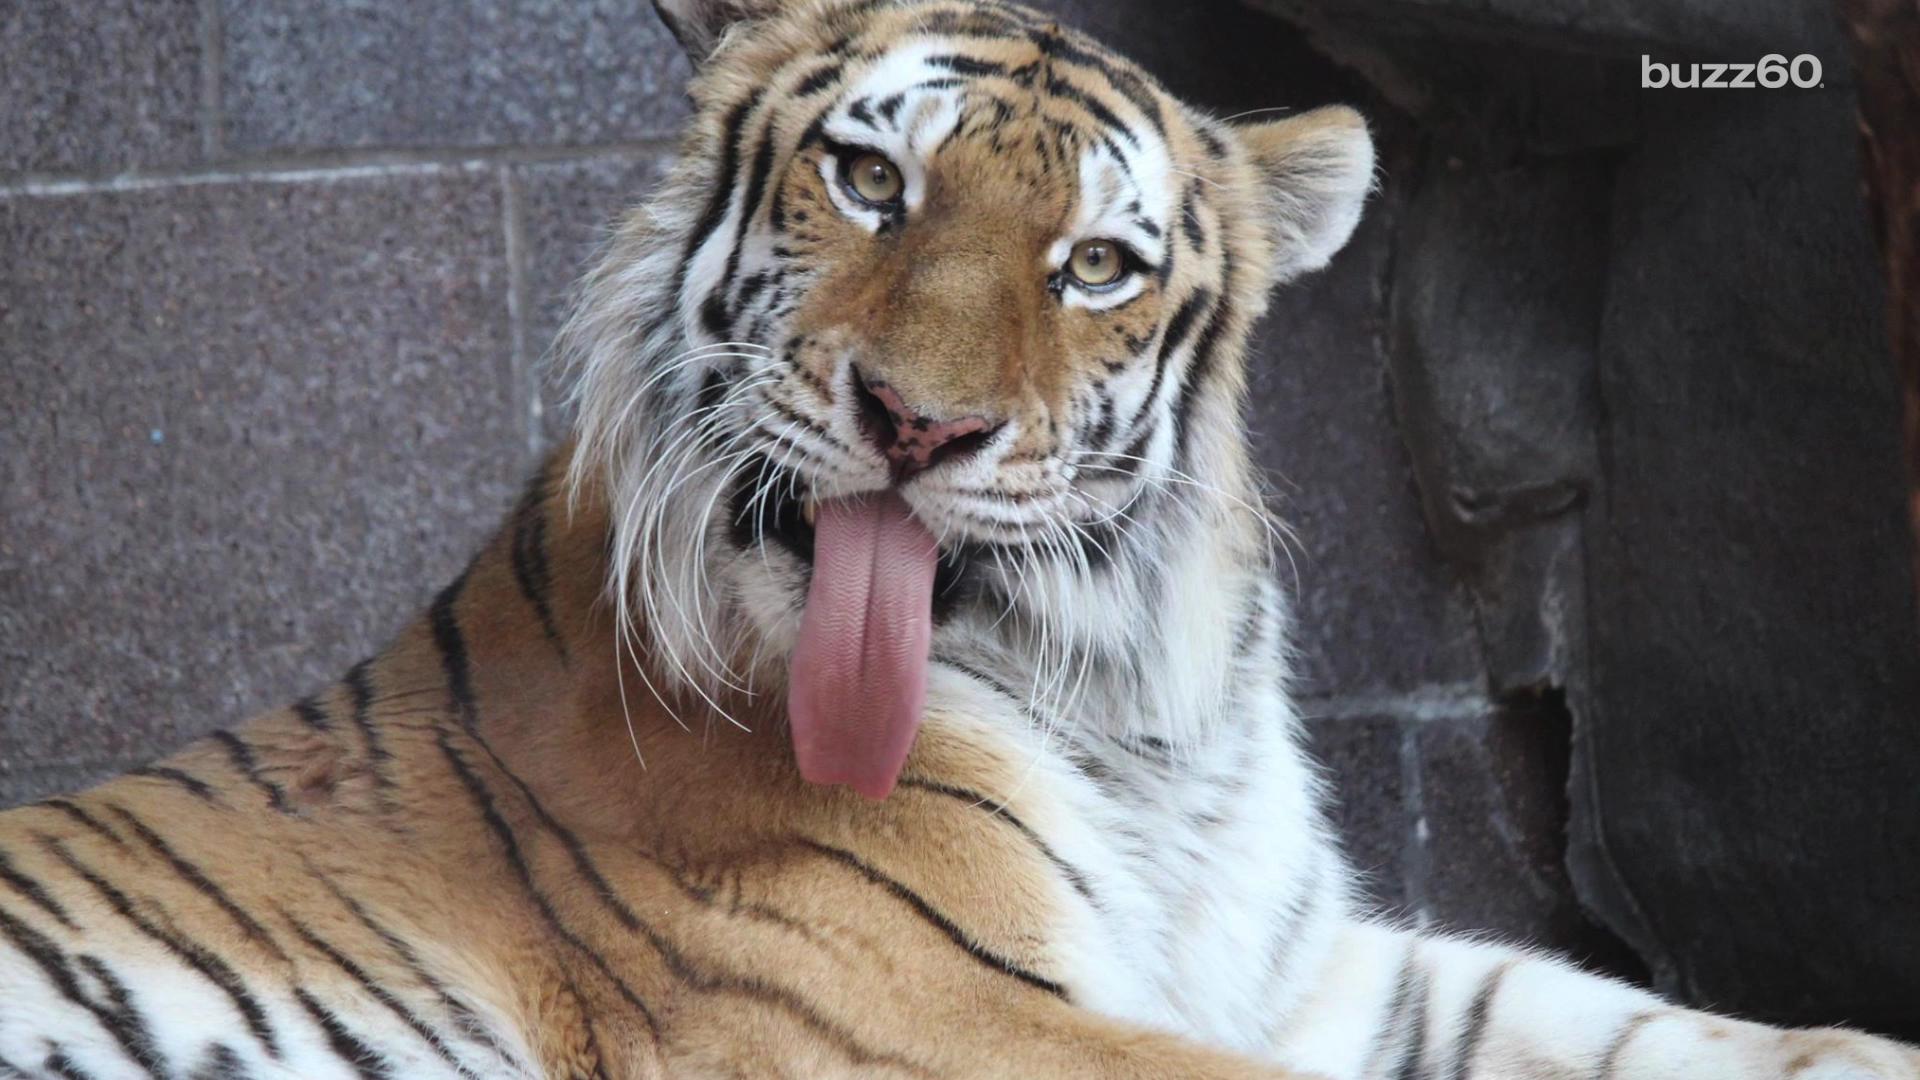 Drunk woman bitten by a tiger after sneaking into a zoo